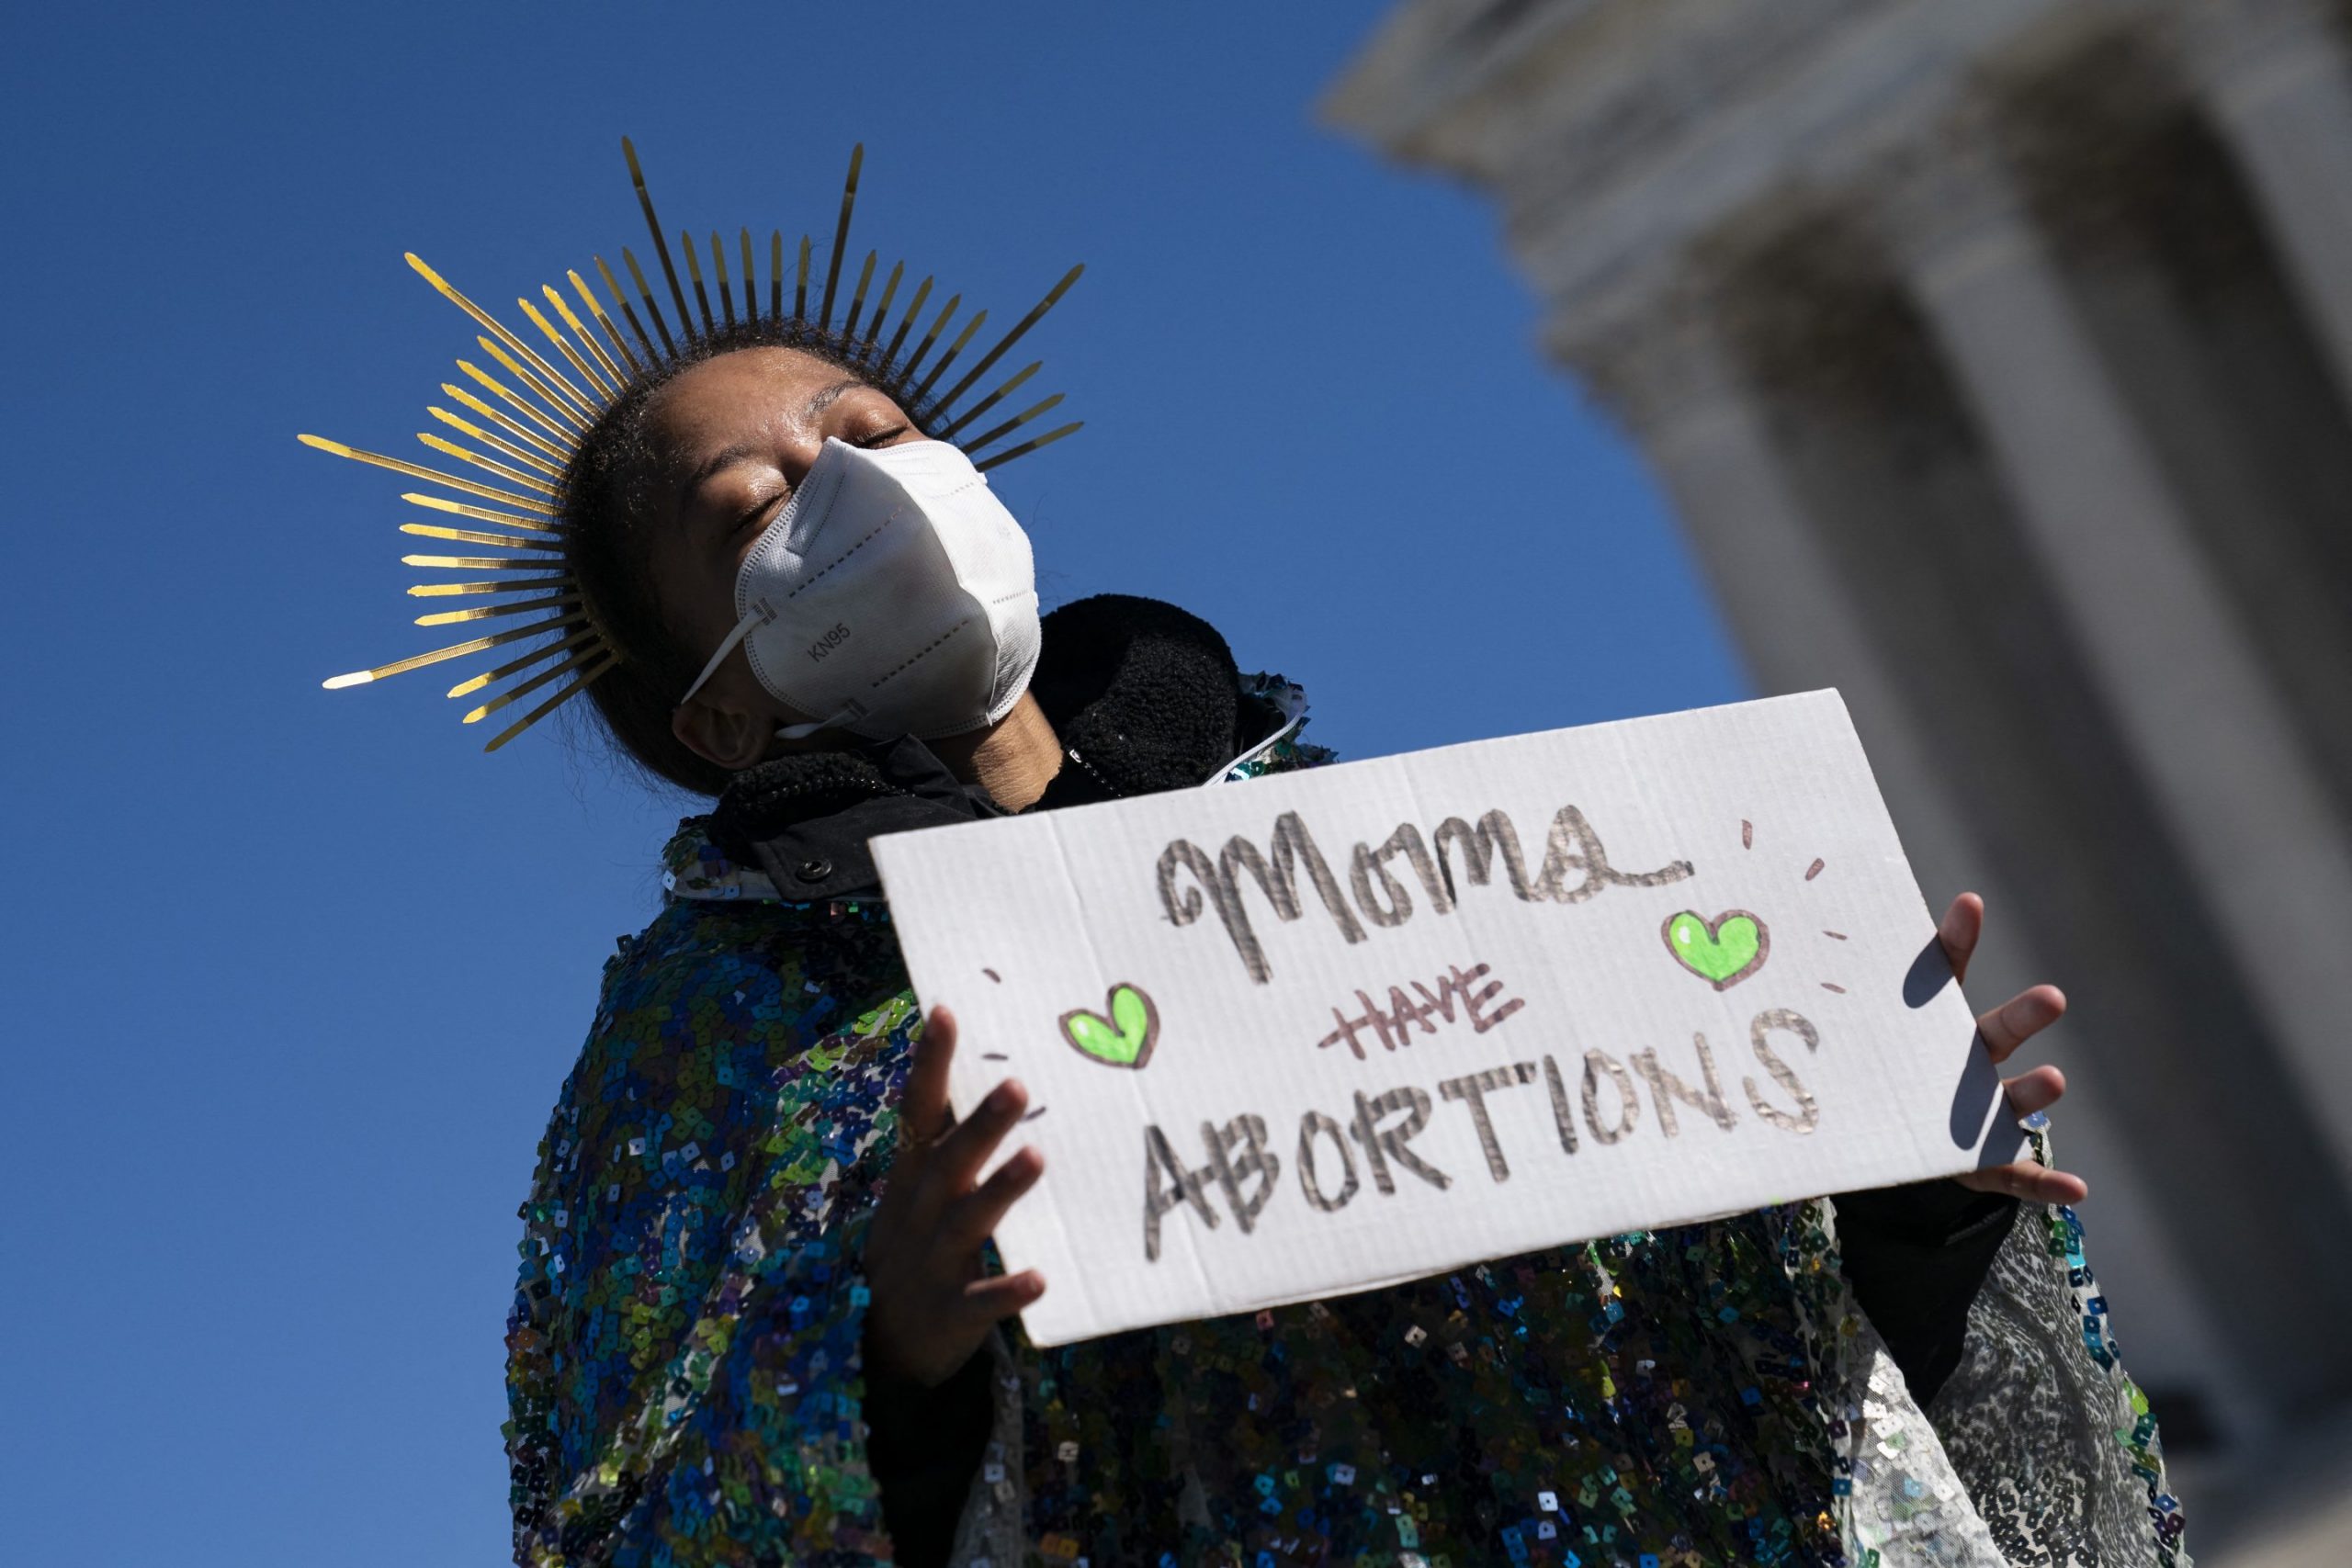 Oklahoma just signed a bill that makes abortion a felony